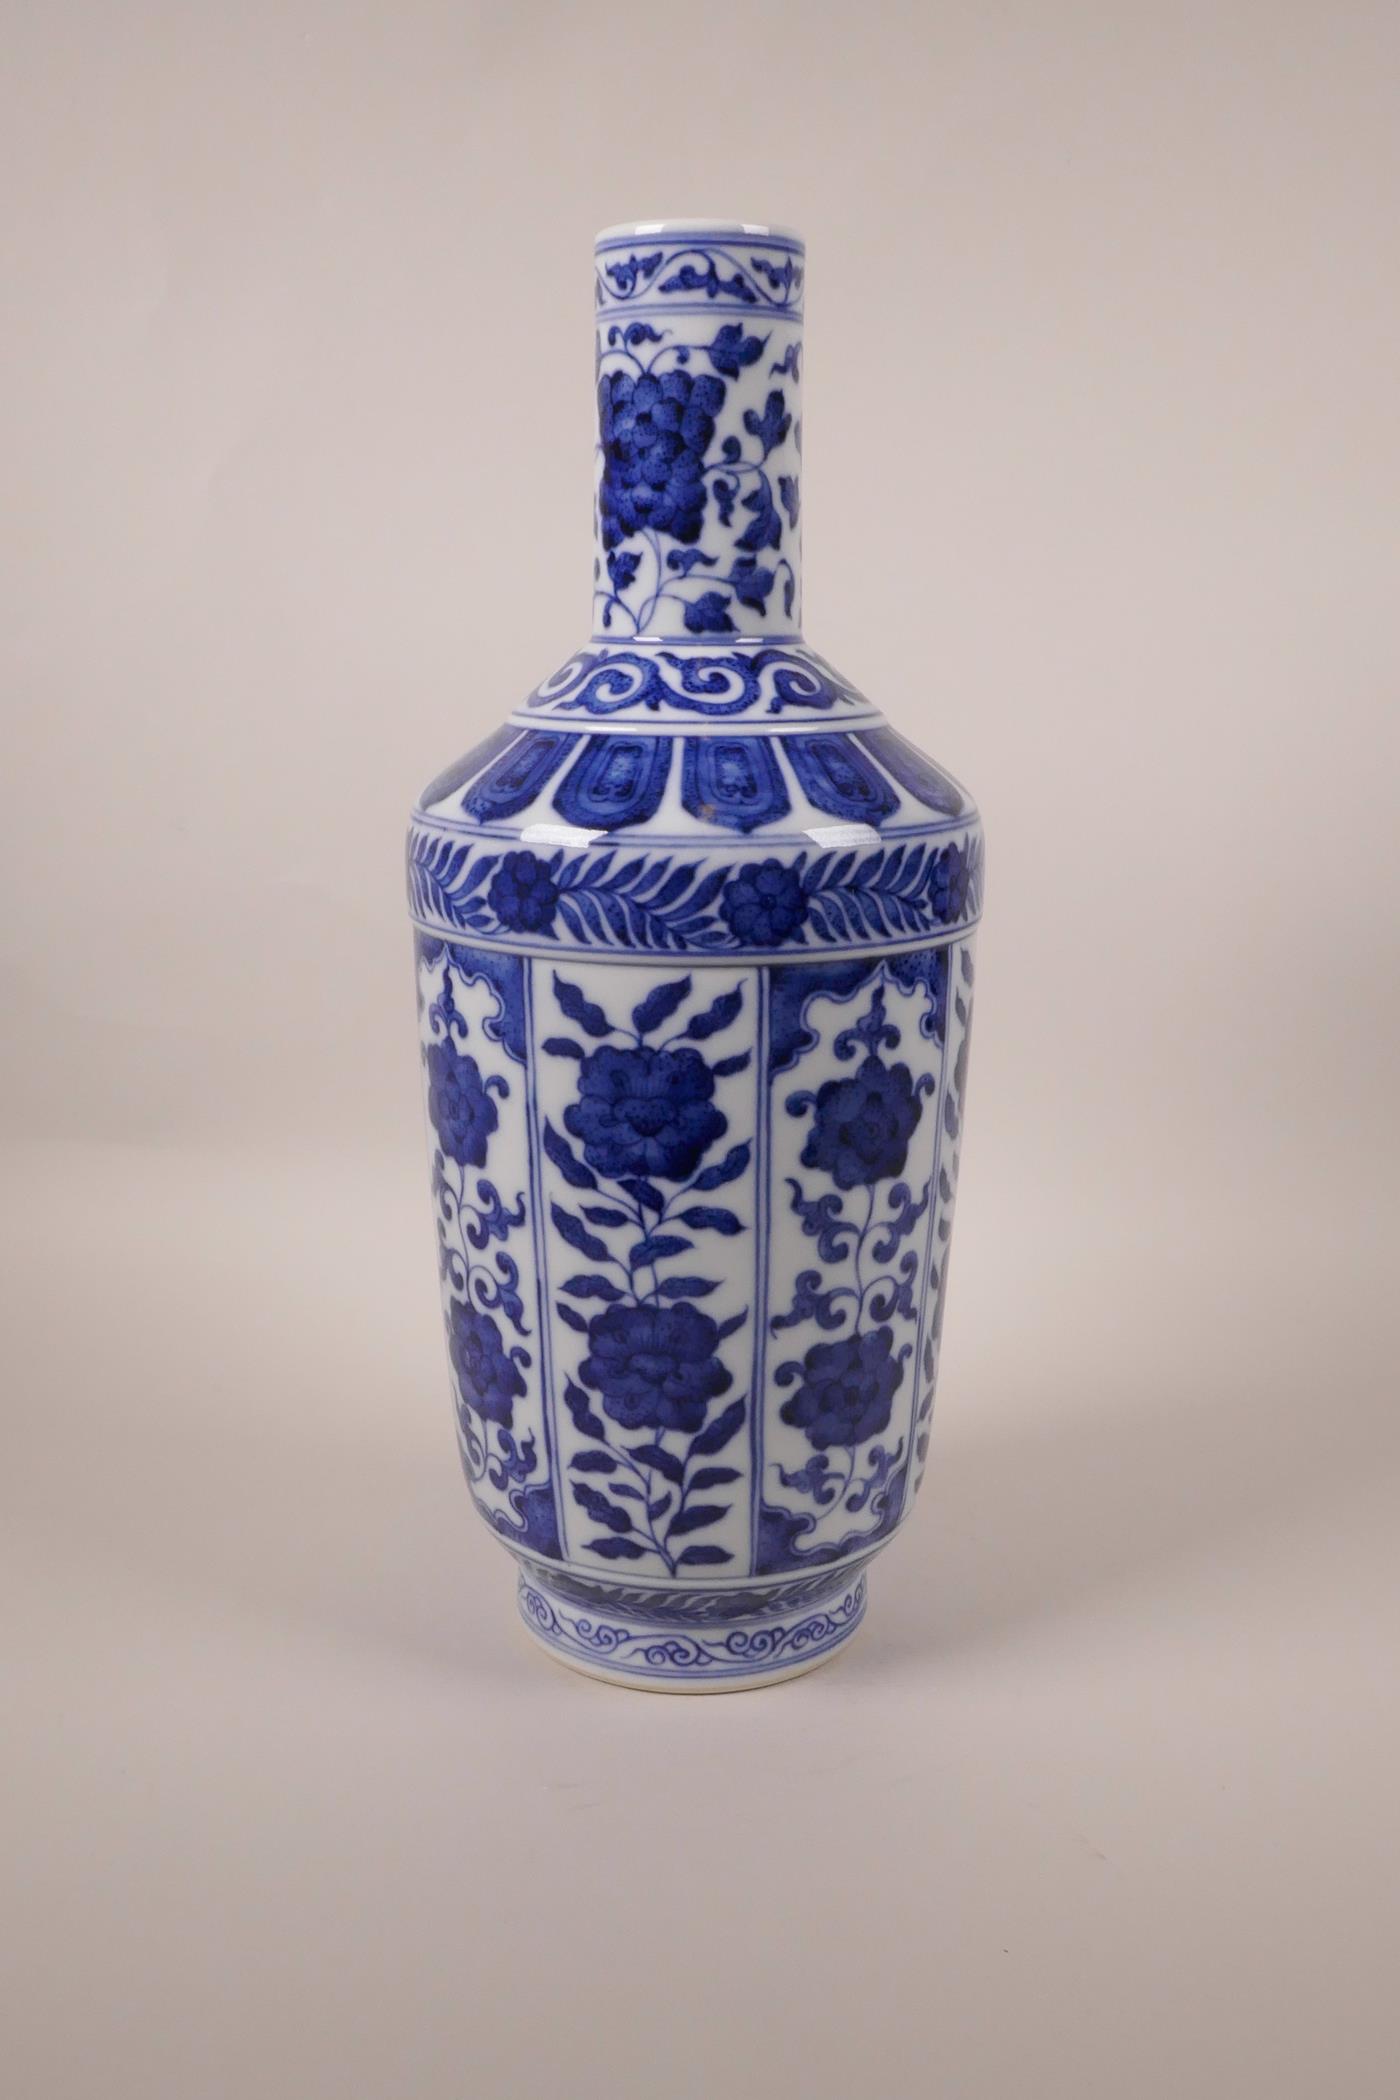 A Chinese blue and white porcelain vase with decorative floral panels, seal mark to base, 13½" high - Image 3 of 8